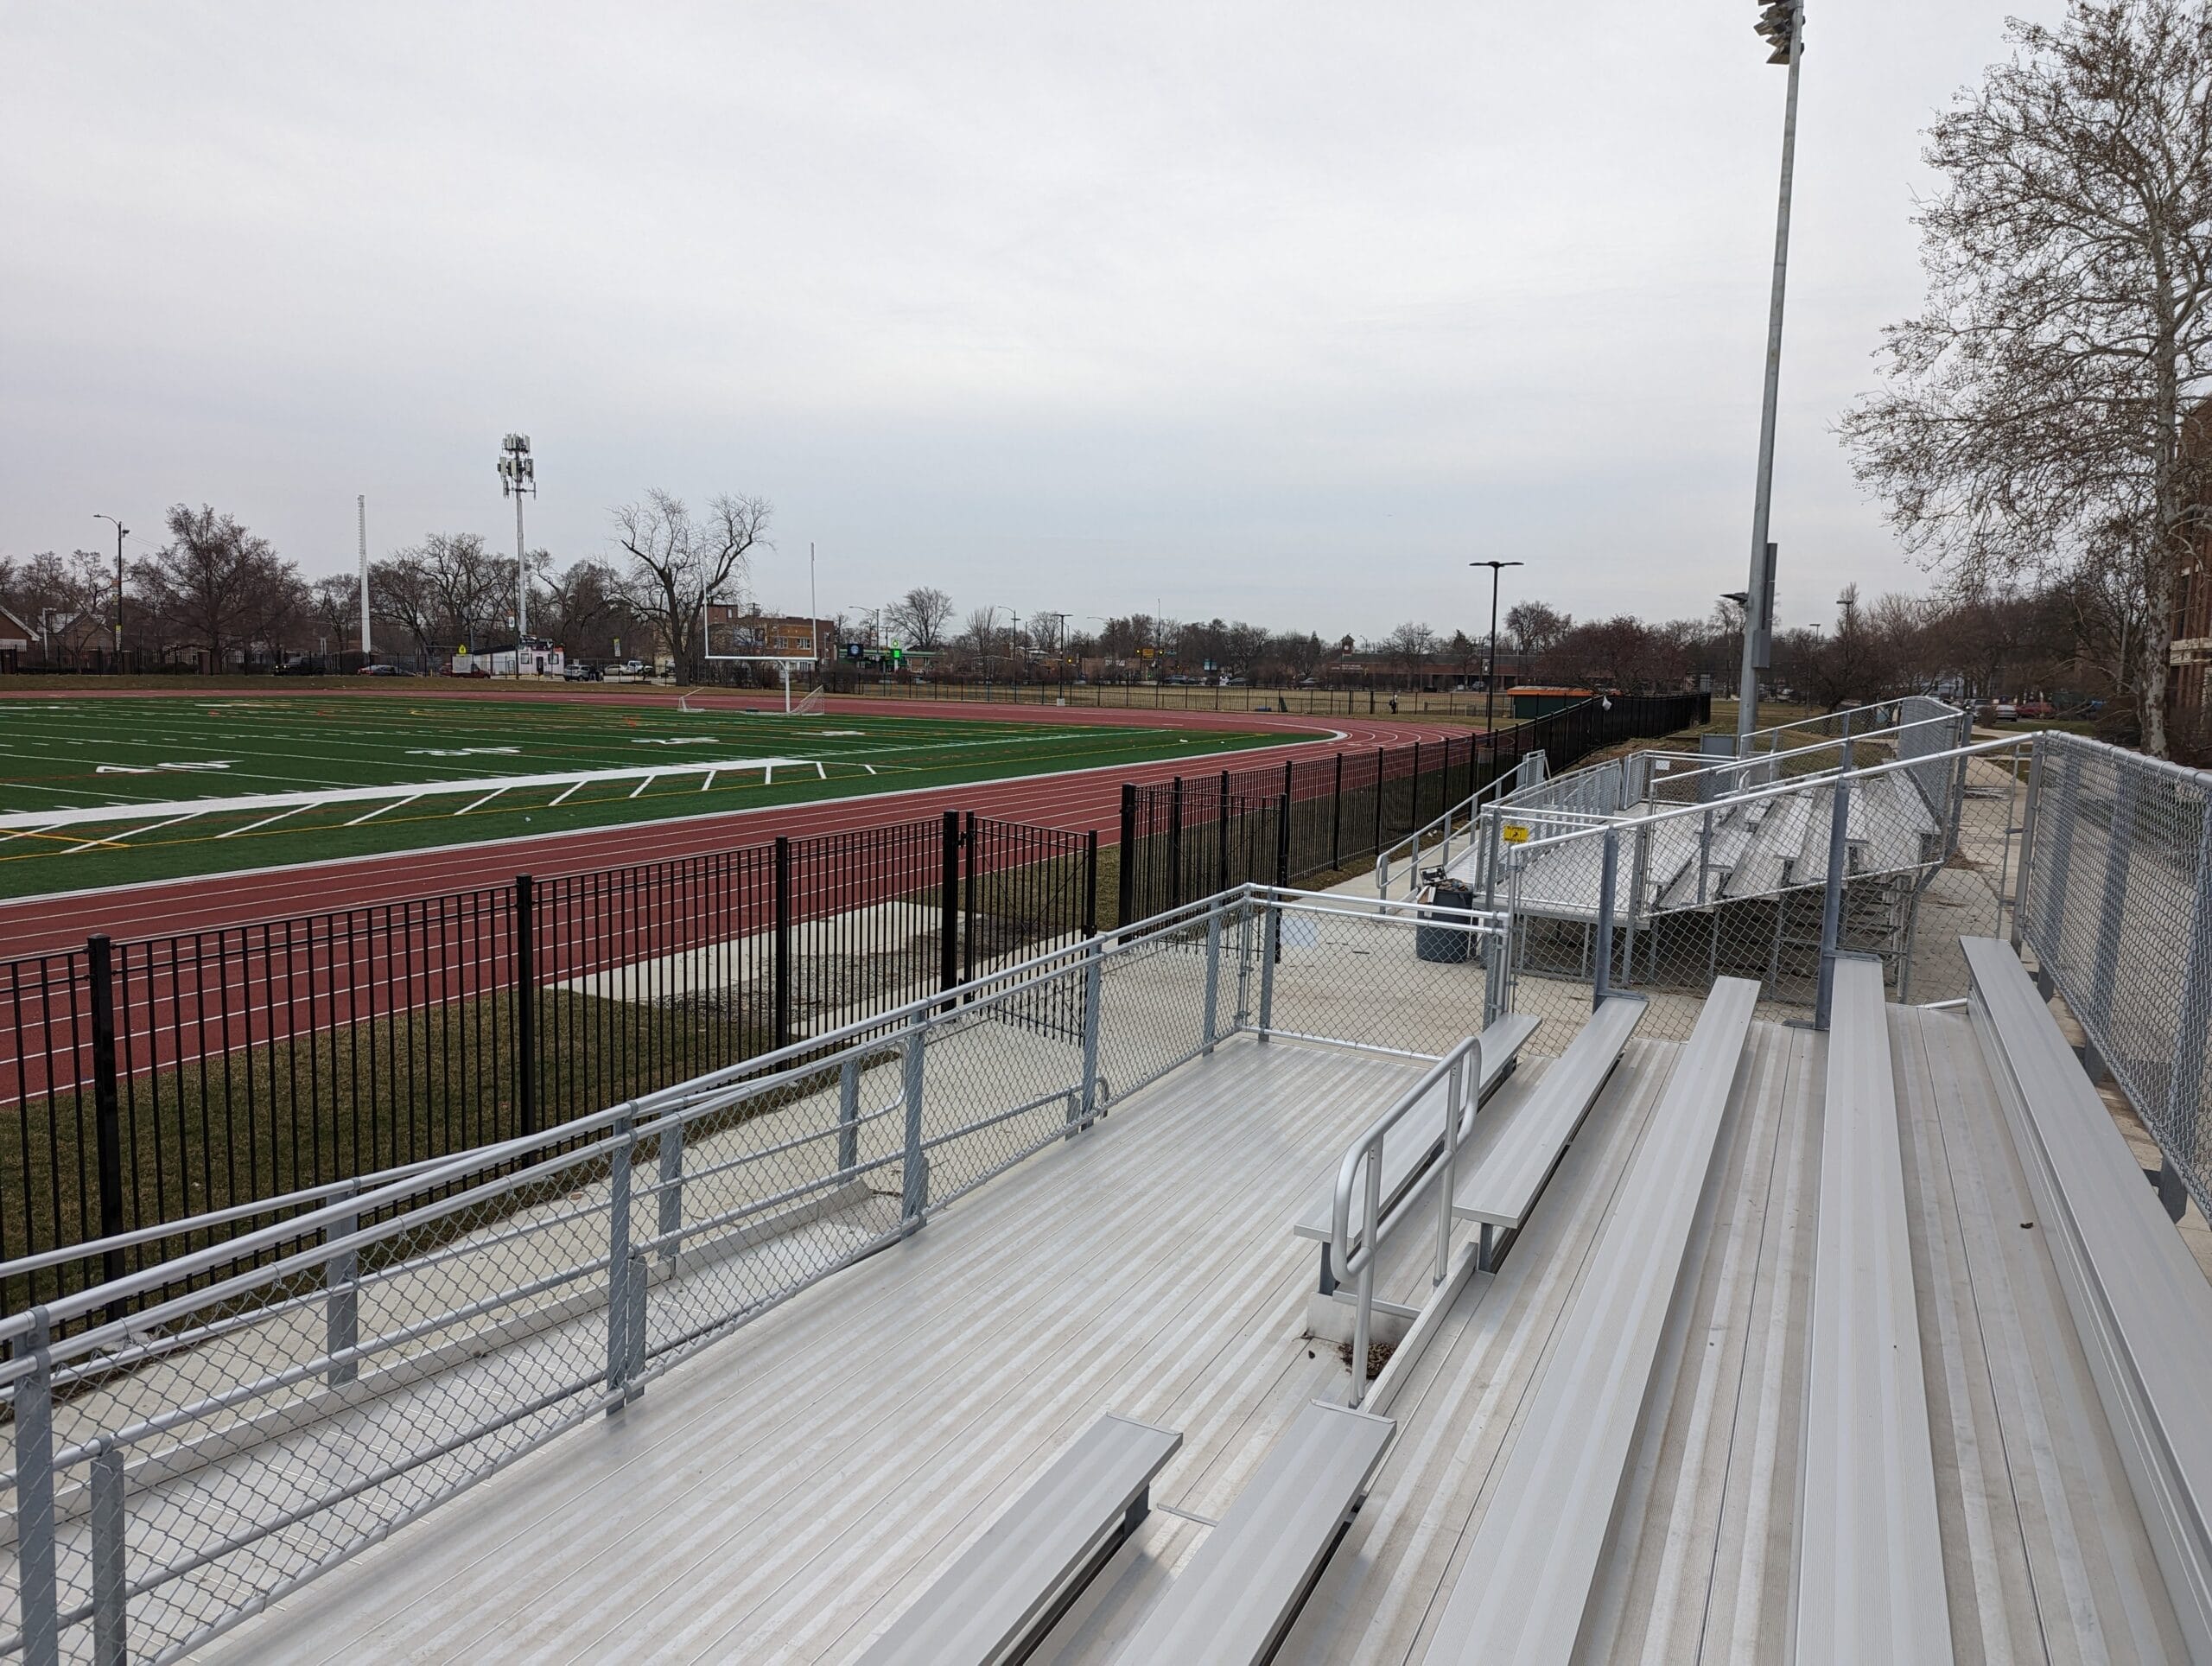 MORGAN PARK EMPTY sports stands | Bobby Cameron for the Chicago Crusader